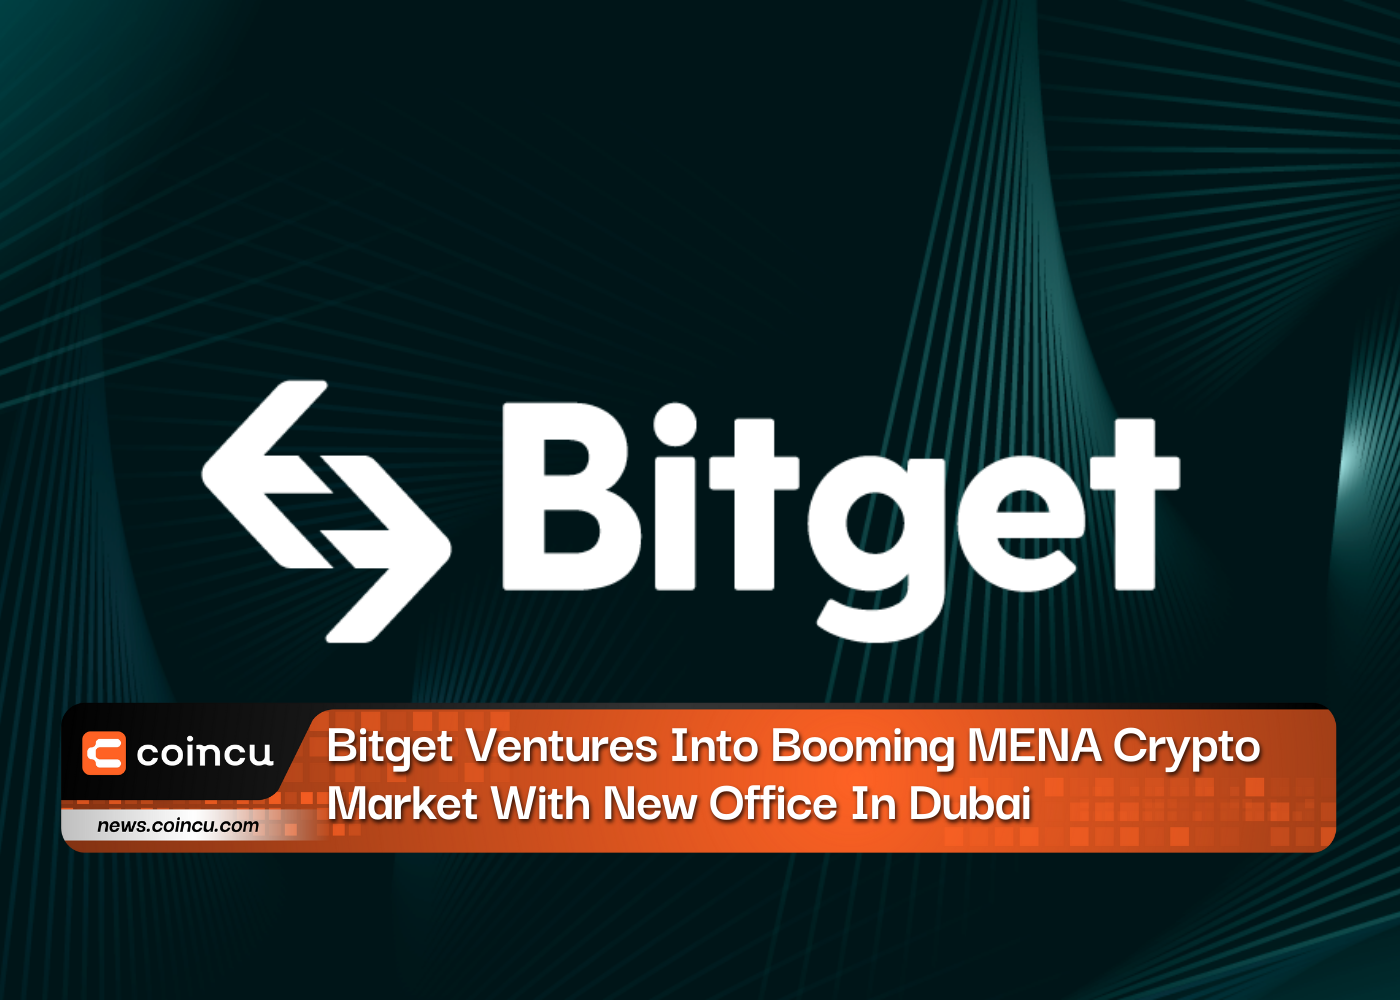 Bitget Ventures Into Booming MENA Crypto Market With New Office In Dubai